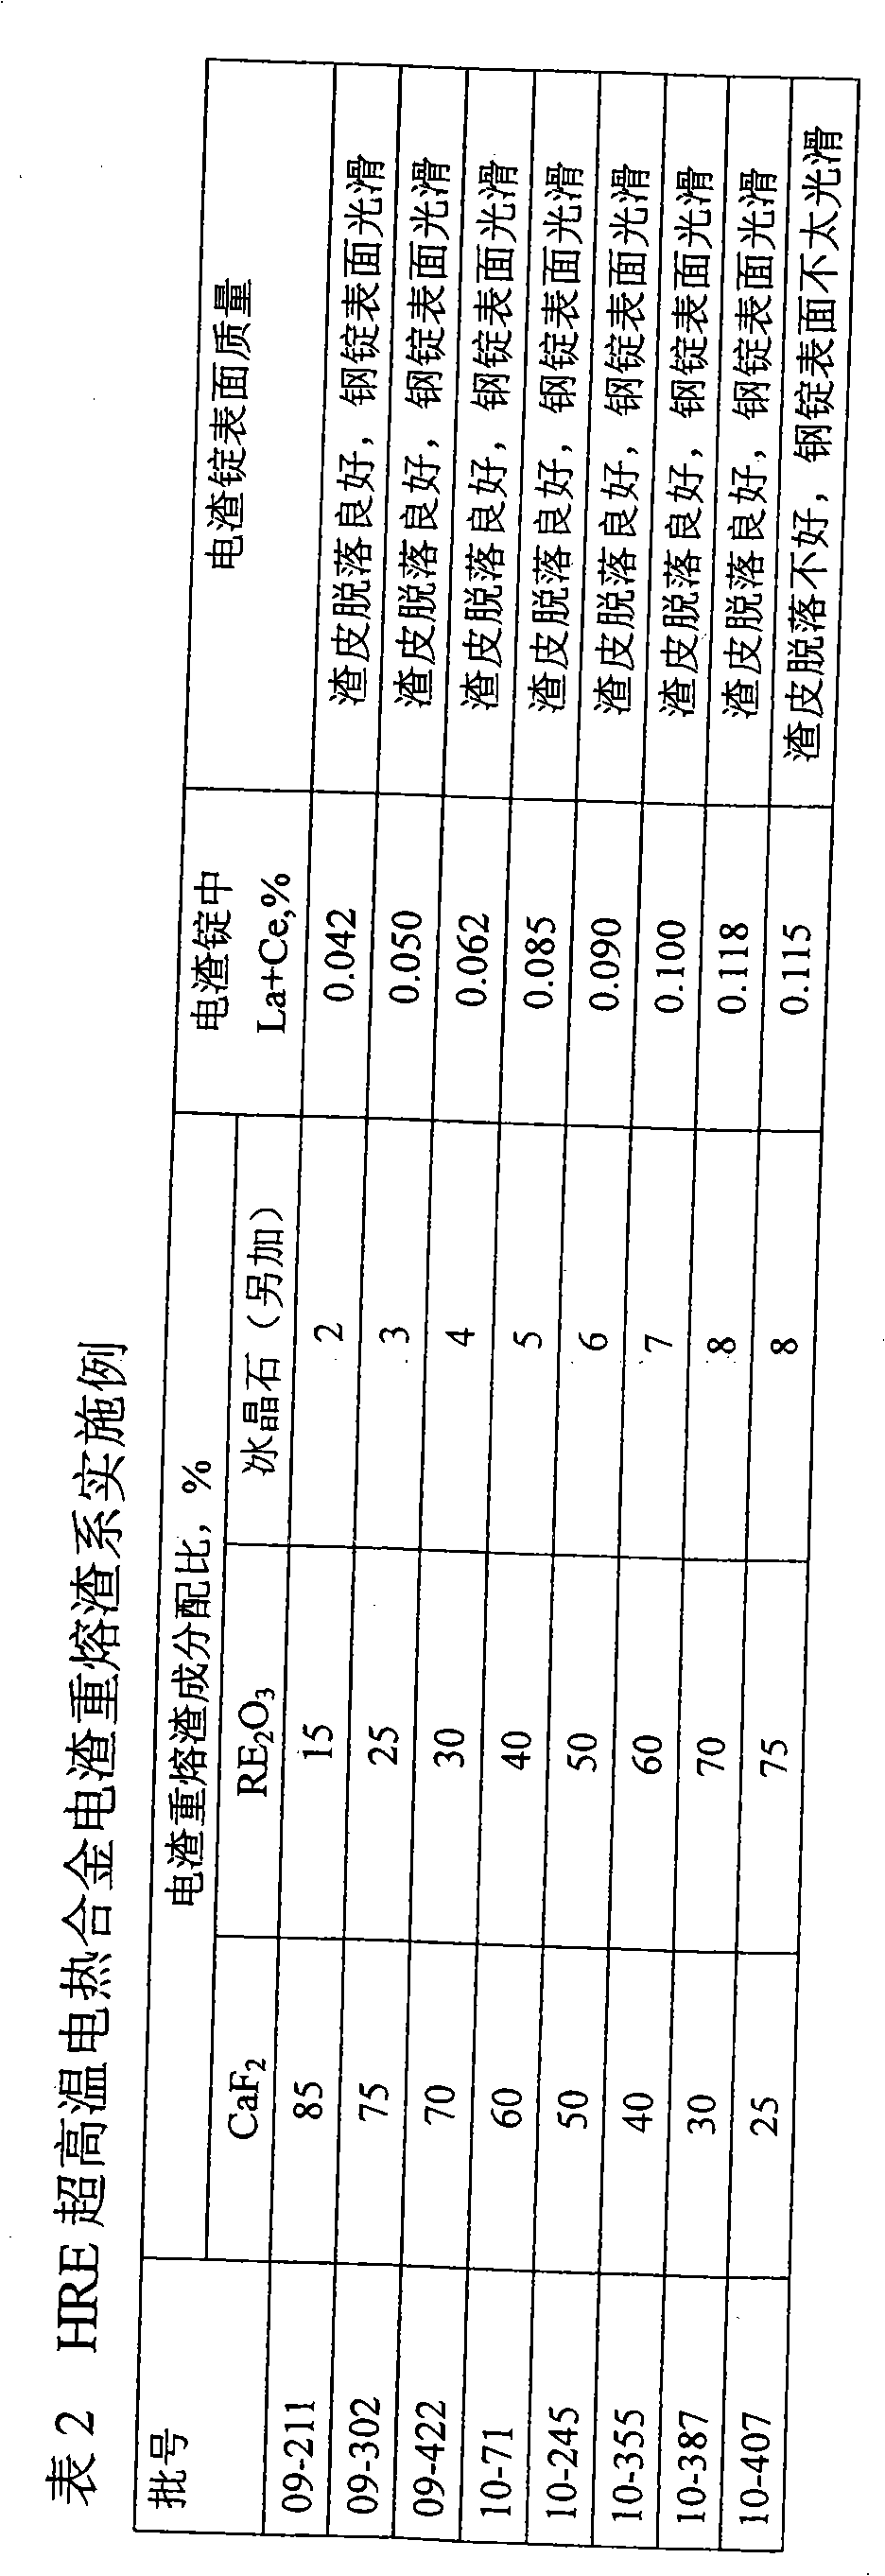 Ultra-high temperature electrothermal alloy and preparation method thereof